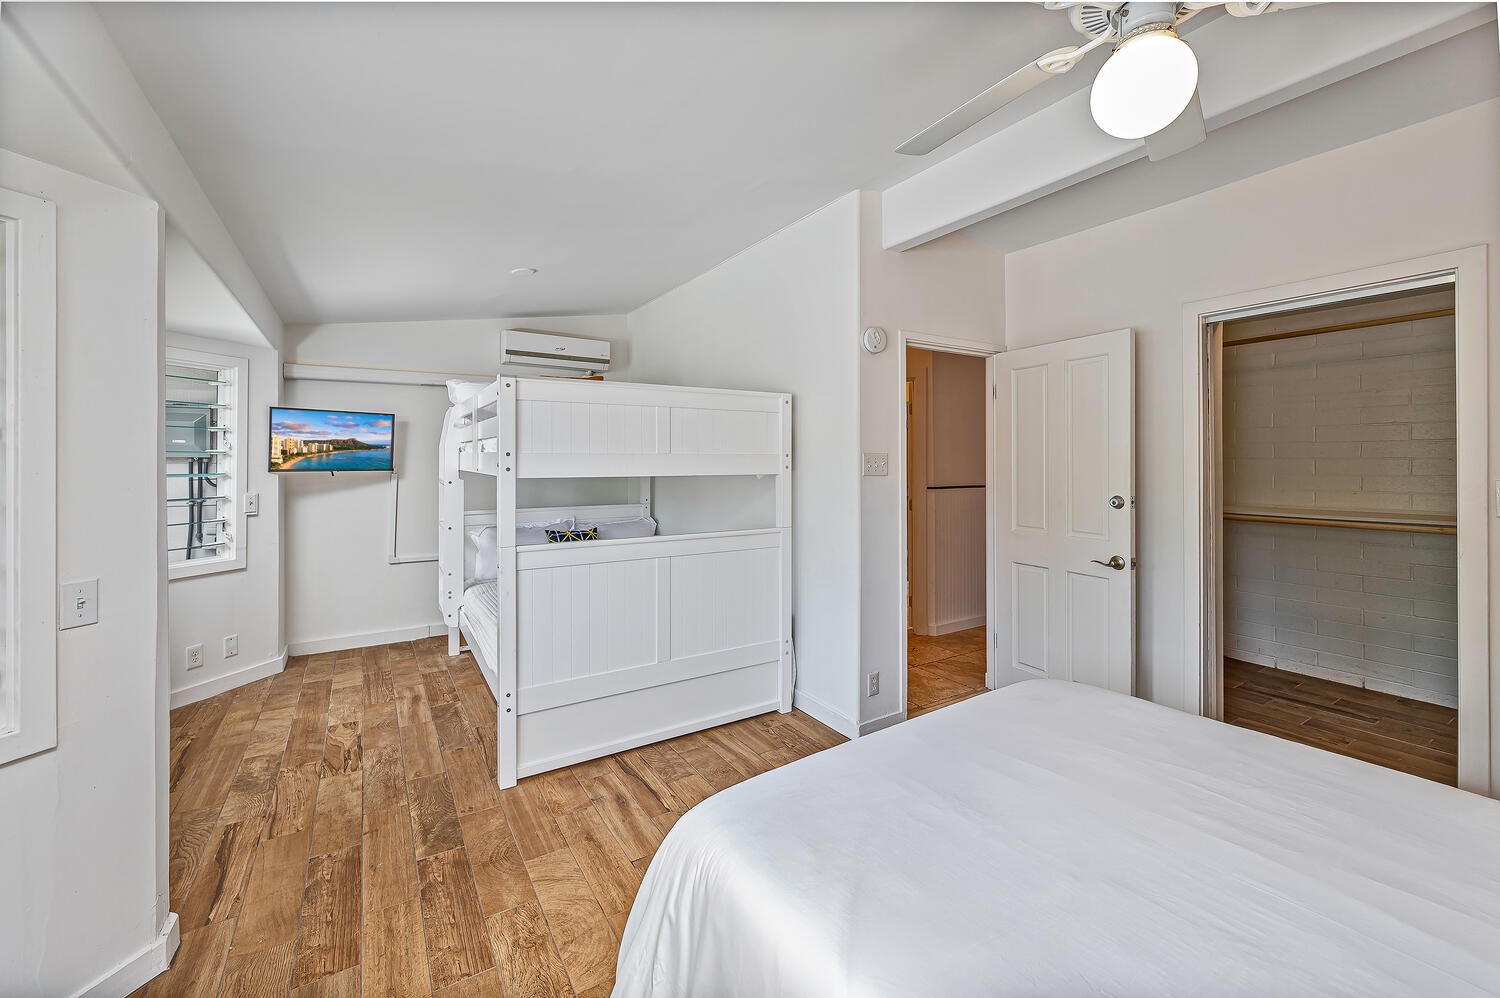 Kailua Vacation Rentals, Villa Hui Hou - Bedroom 4 is a kids haven with their very own tv. Complete with a queen bed, full size bunkbed and twin trundle!